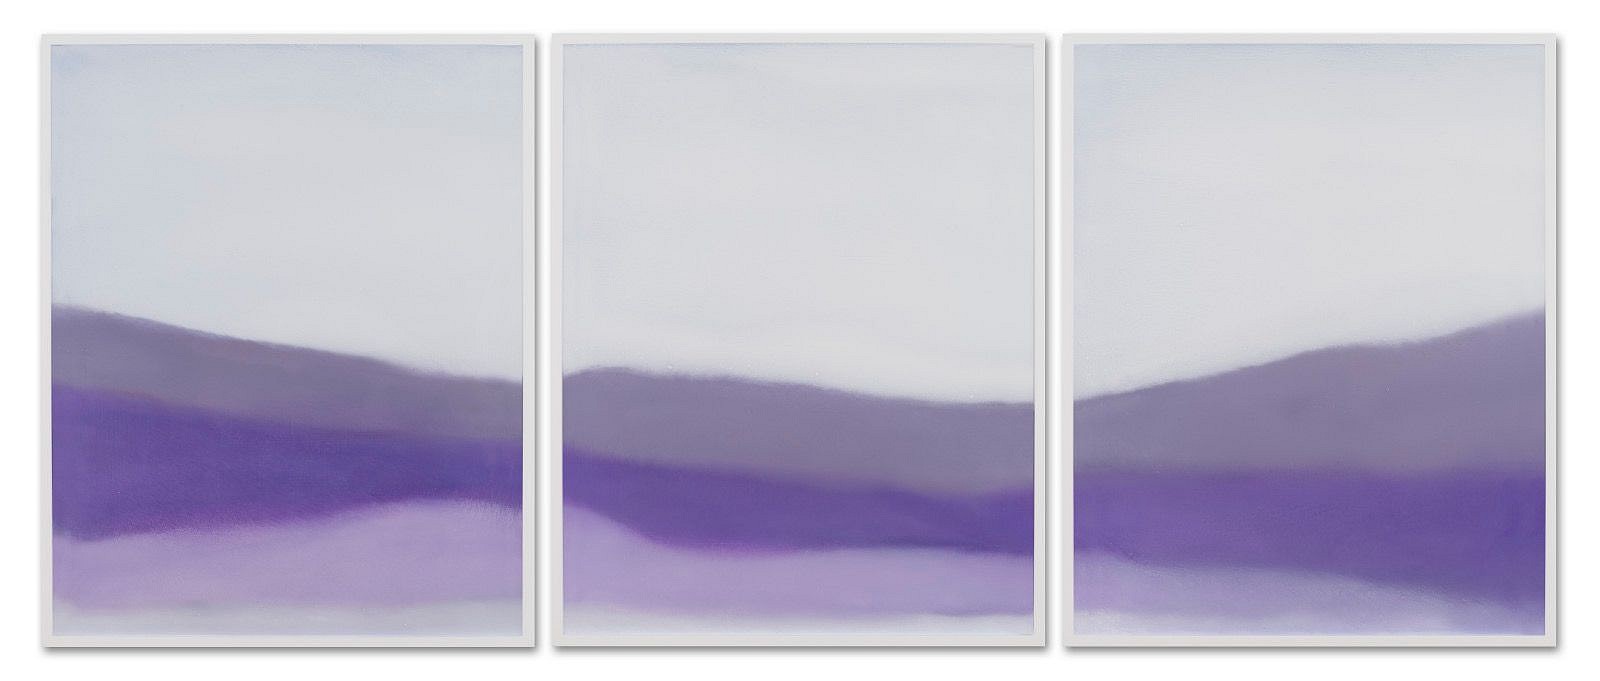 Susan Vecsey, Untitled (White / Lavender) | SOLD, 2019
Oil on paper, 40 x 96 in. (101.6 x 243.8 cm)
VEC-00201